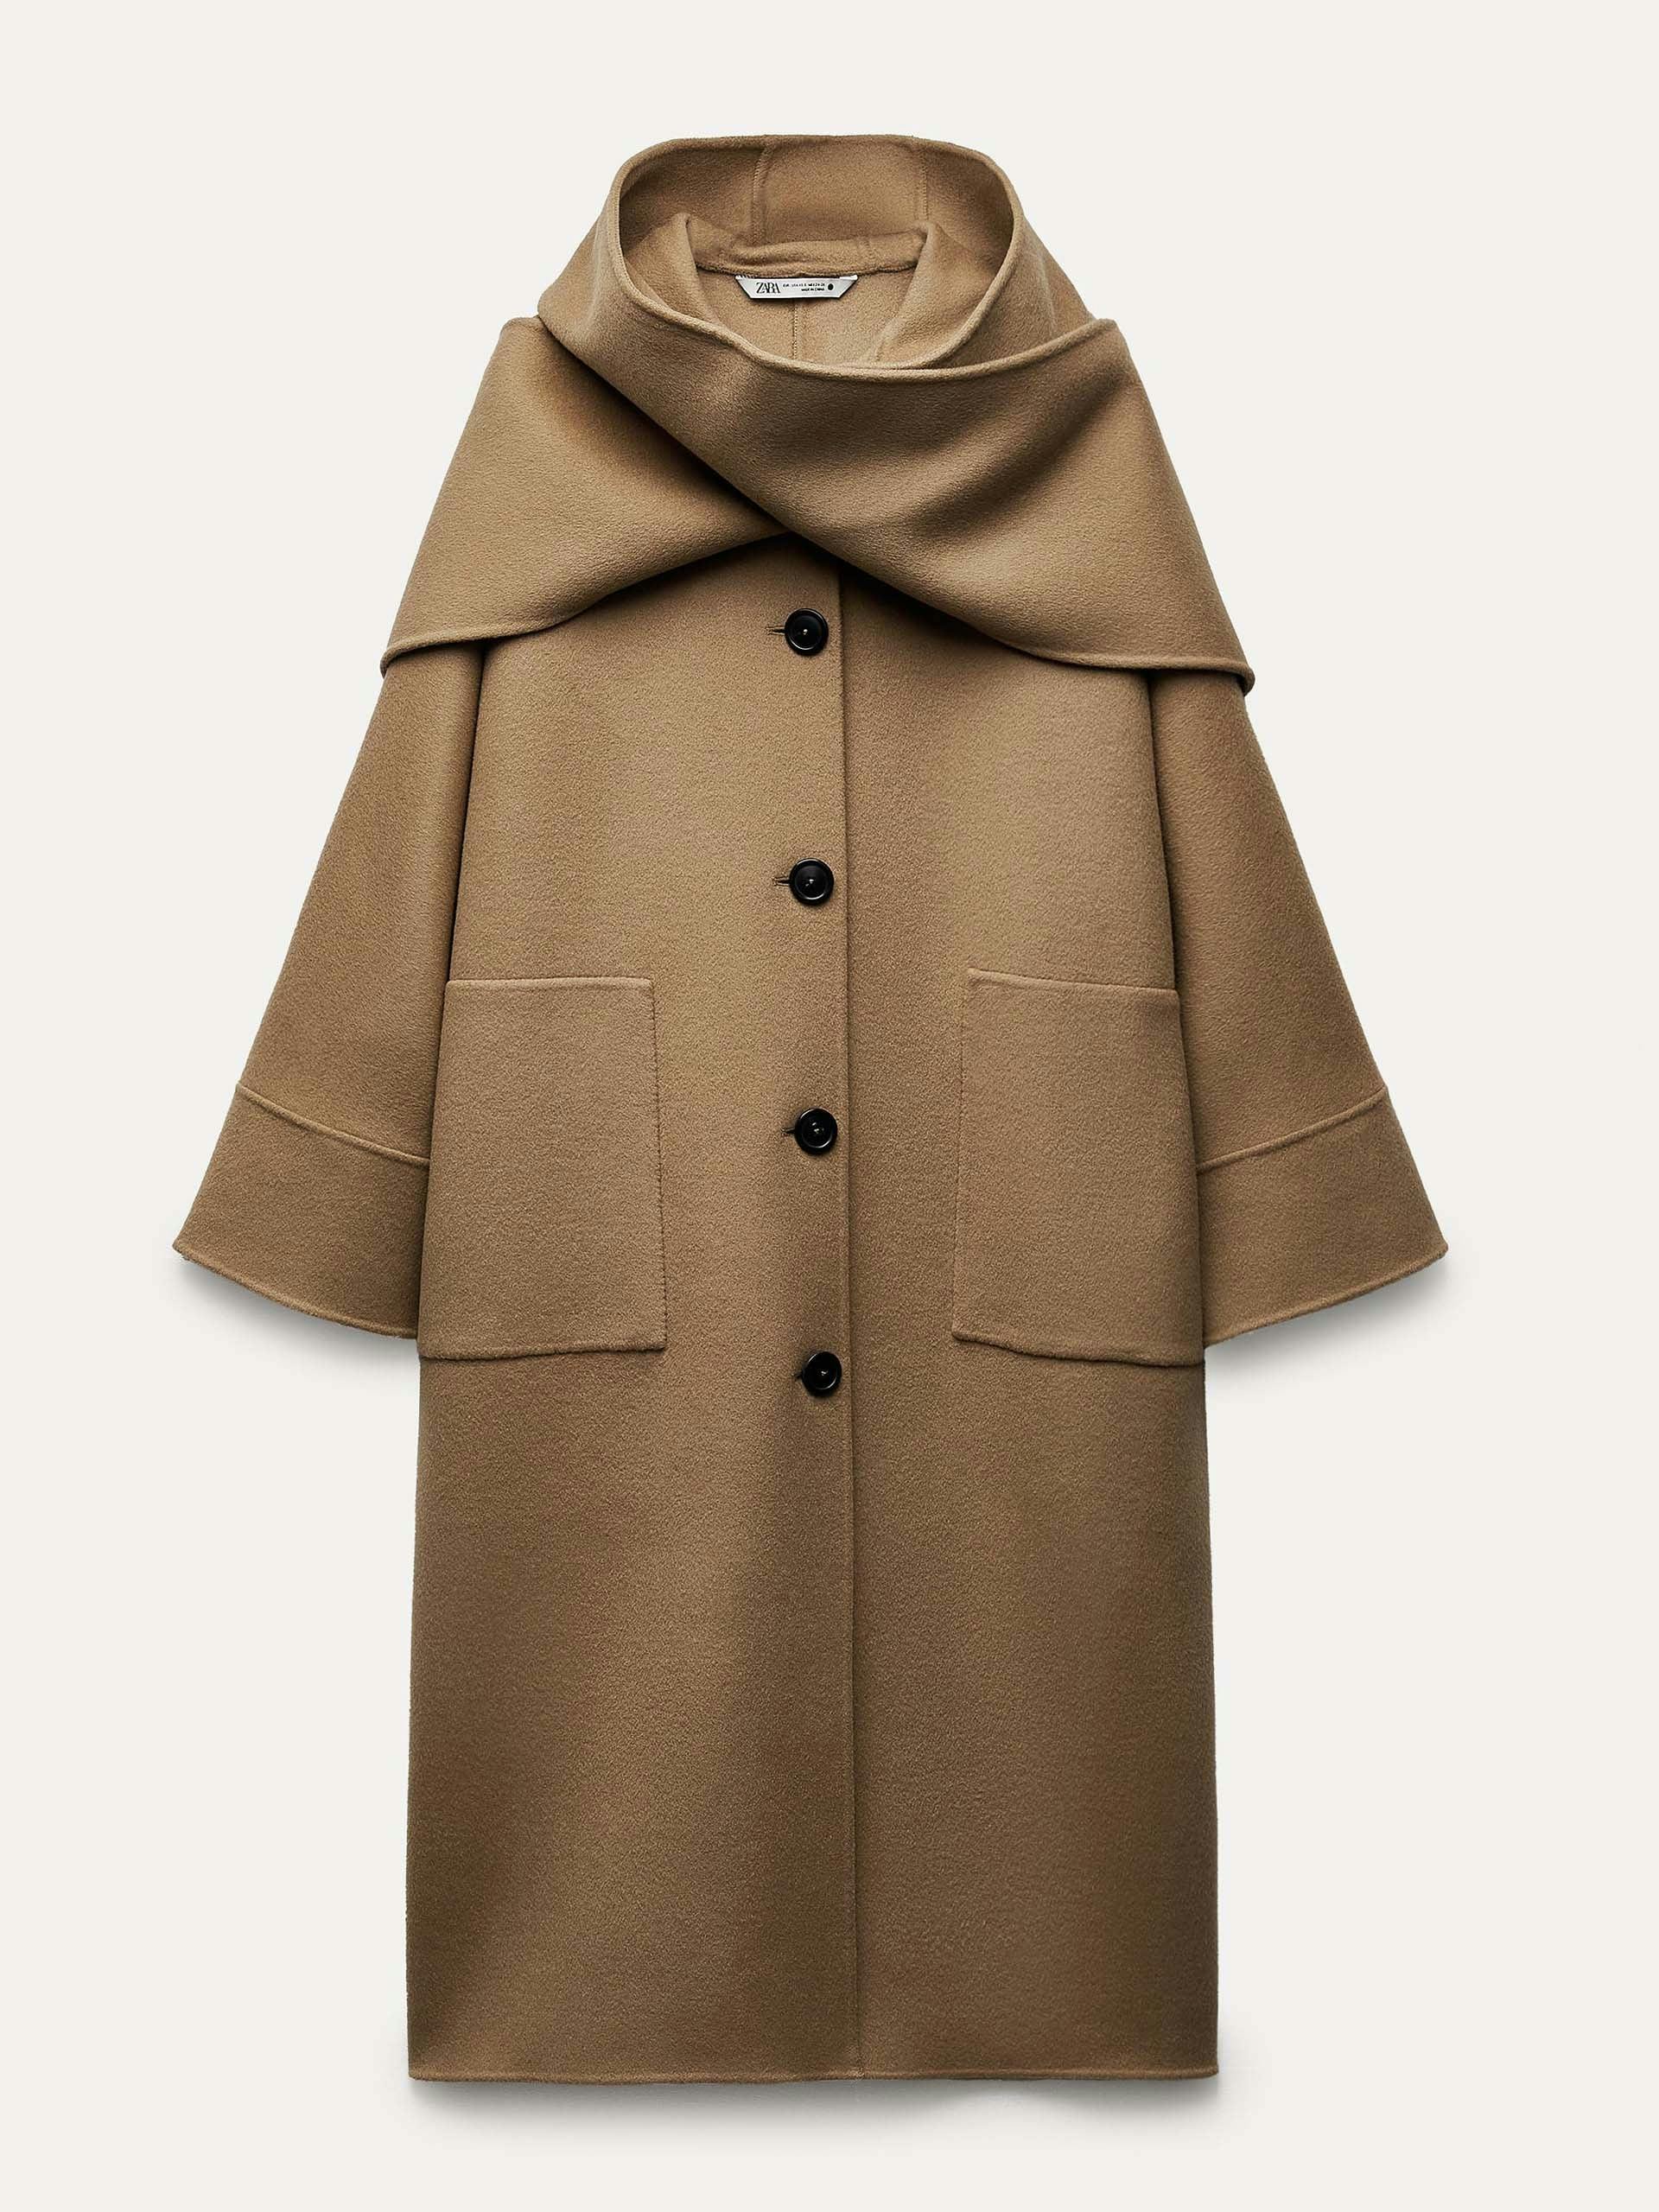 Double-faced wool coat